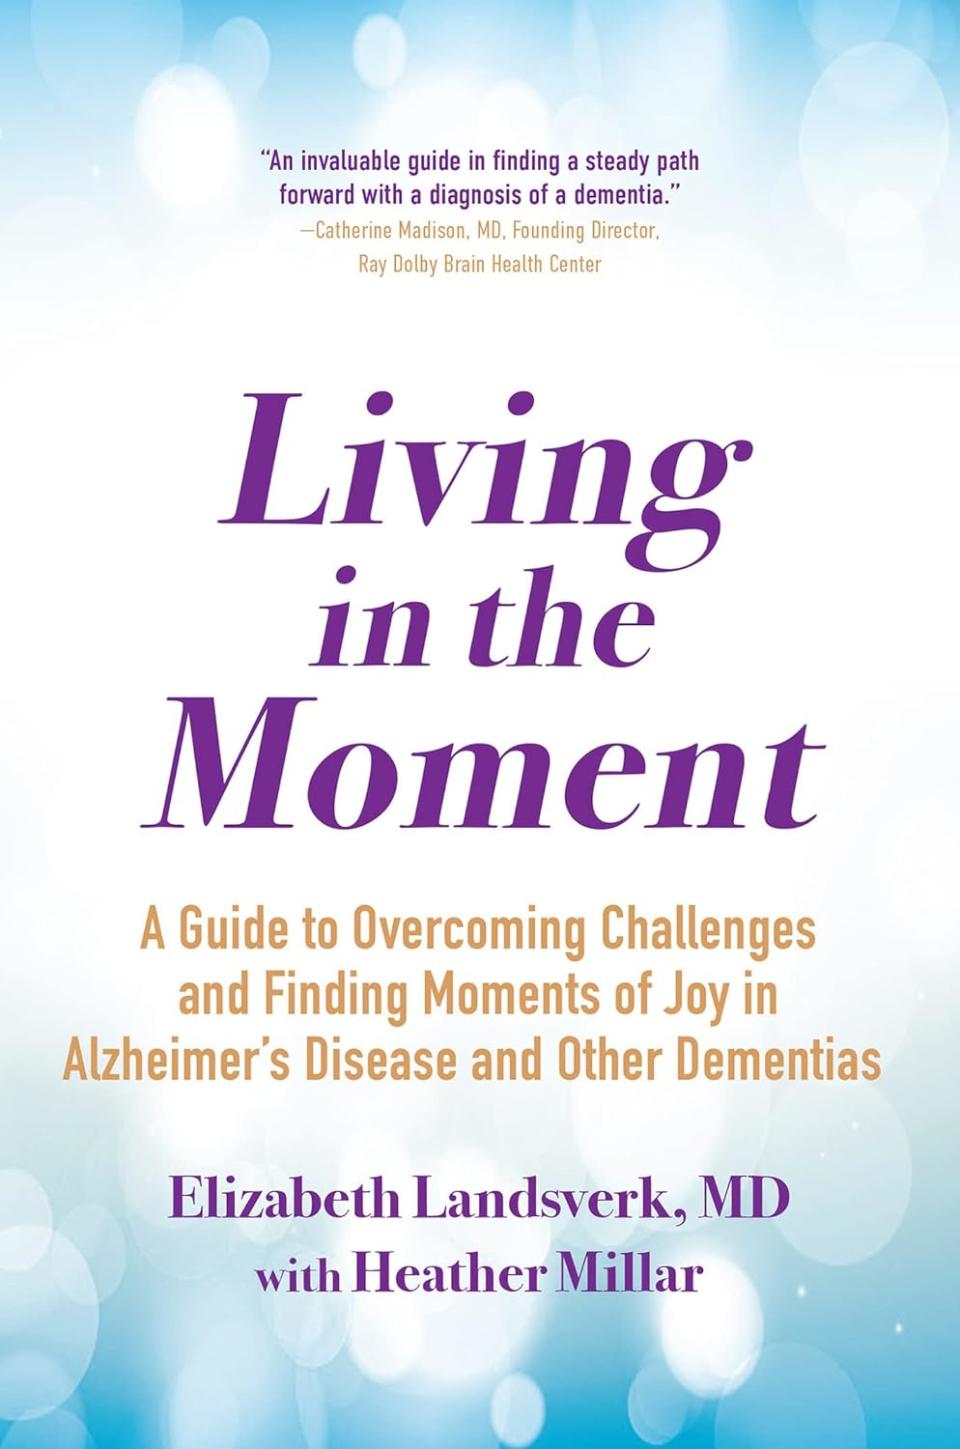 ‘Living in the Moment’ by Elizabeth Landsverk with Heather Millar